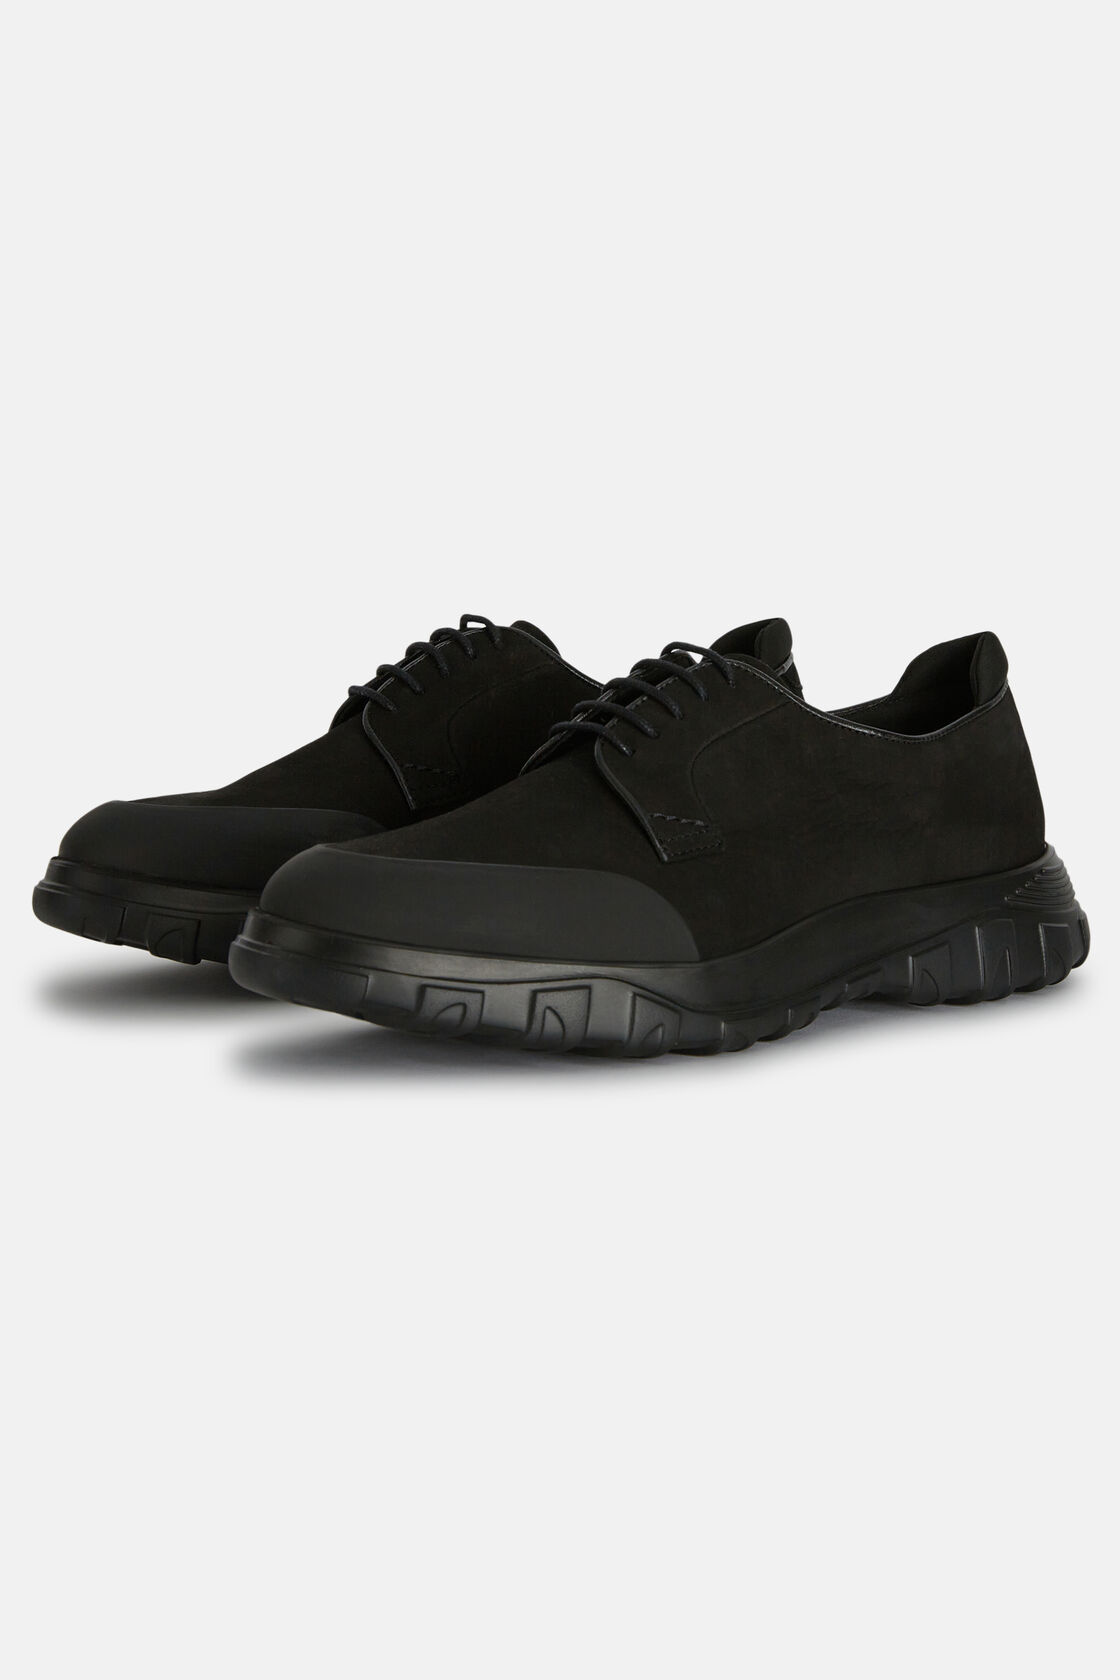 Suede Leather and Rubber Derby Shoes, Black, hi-res